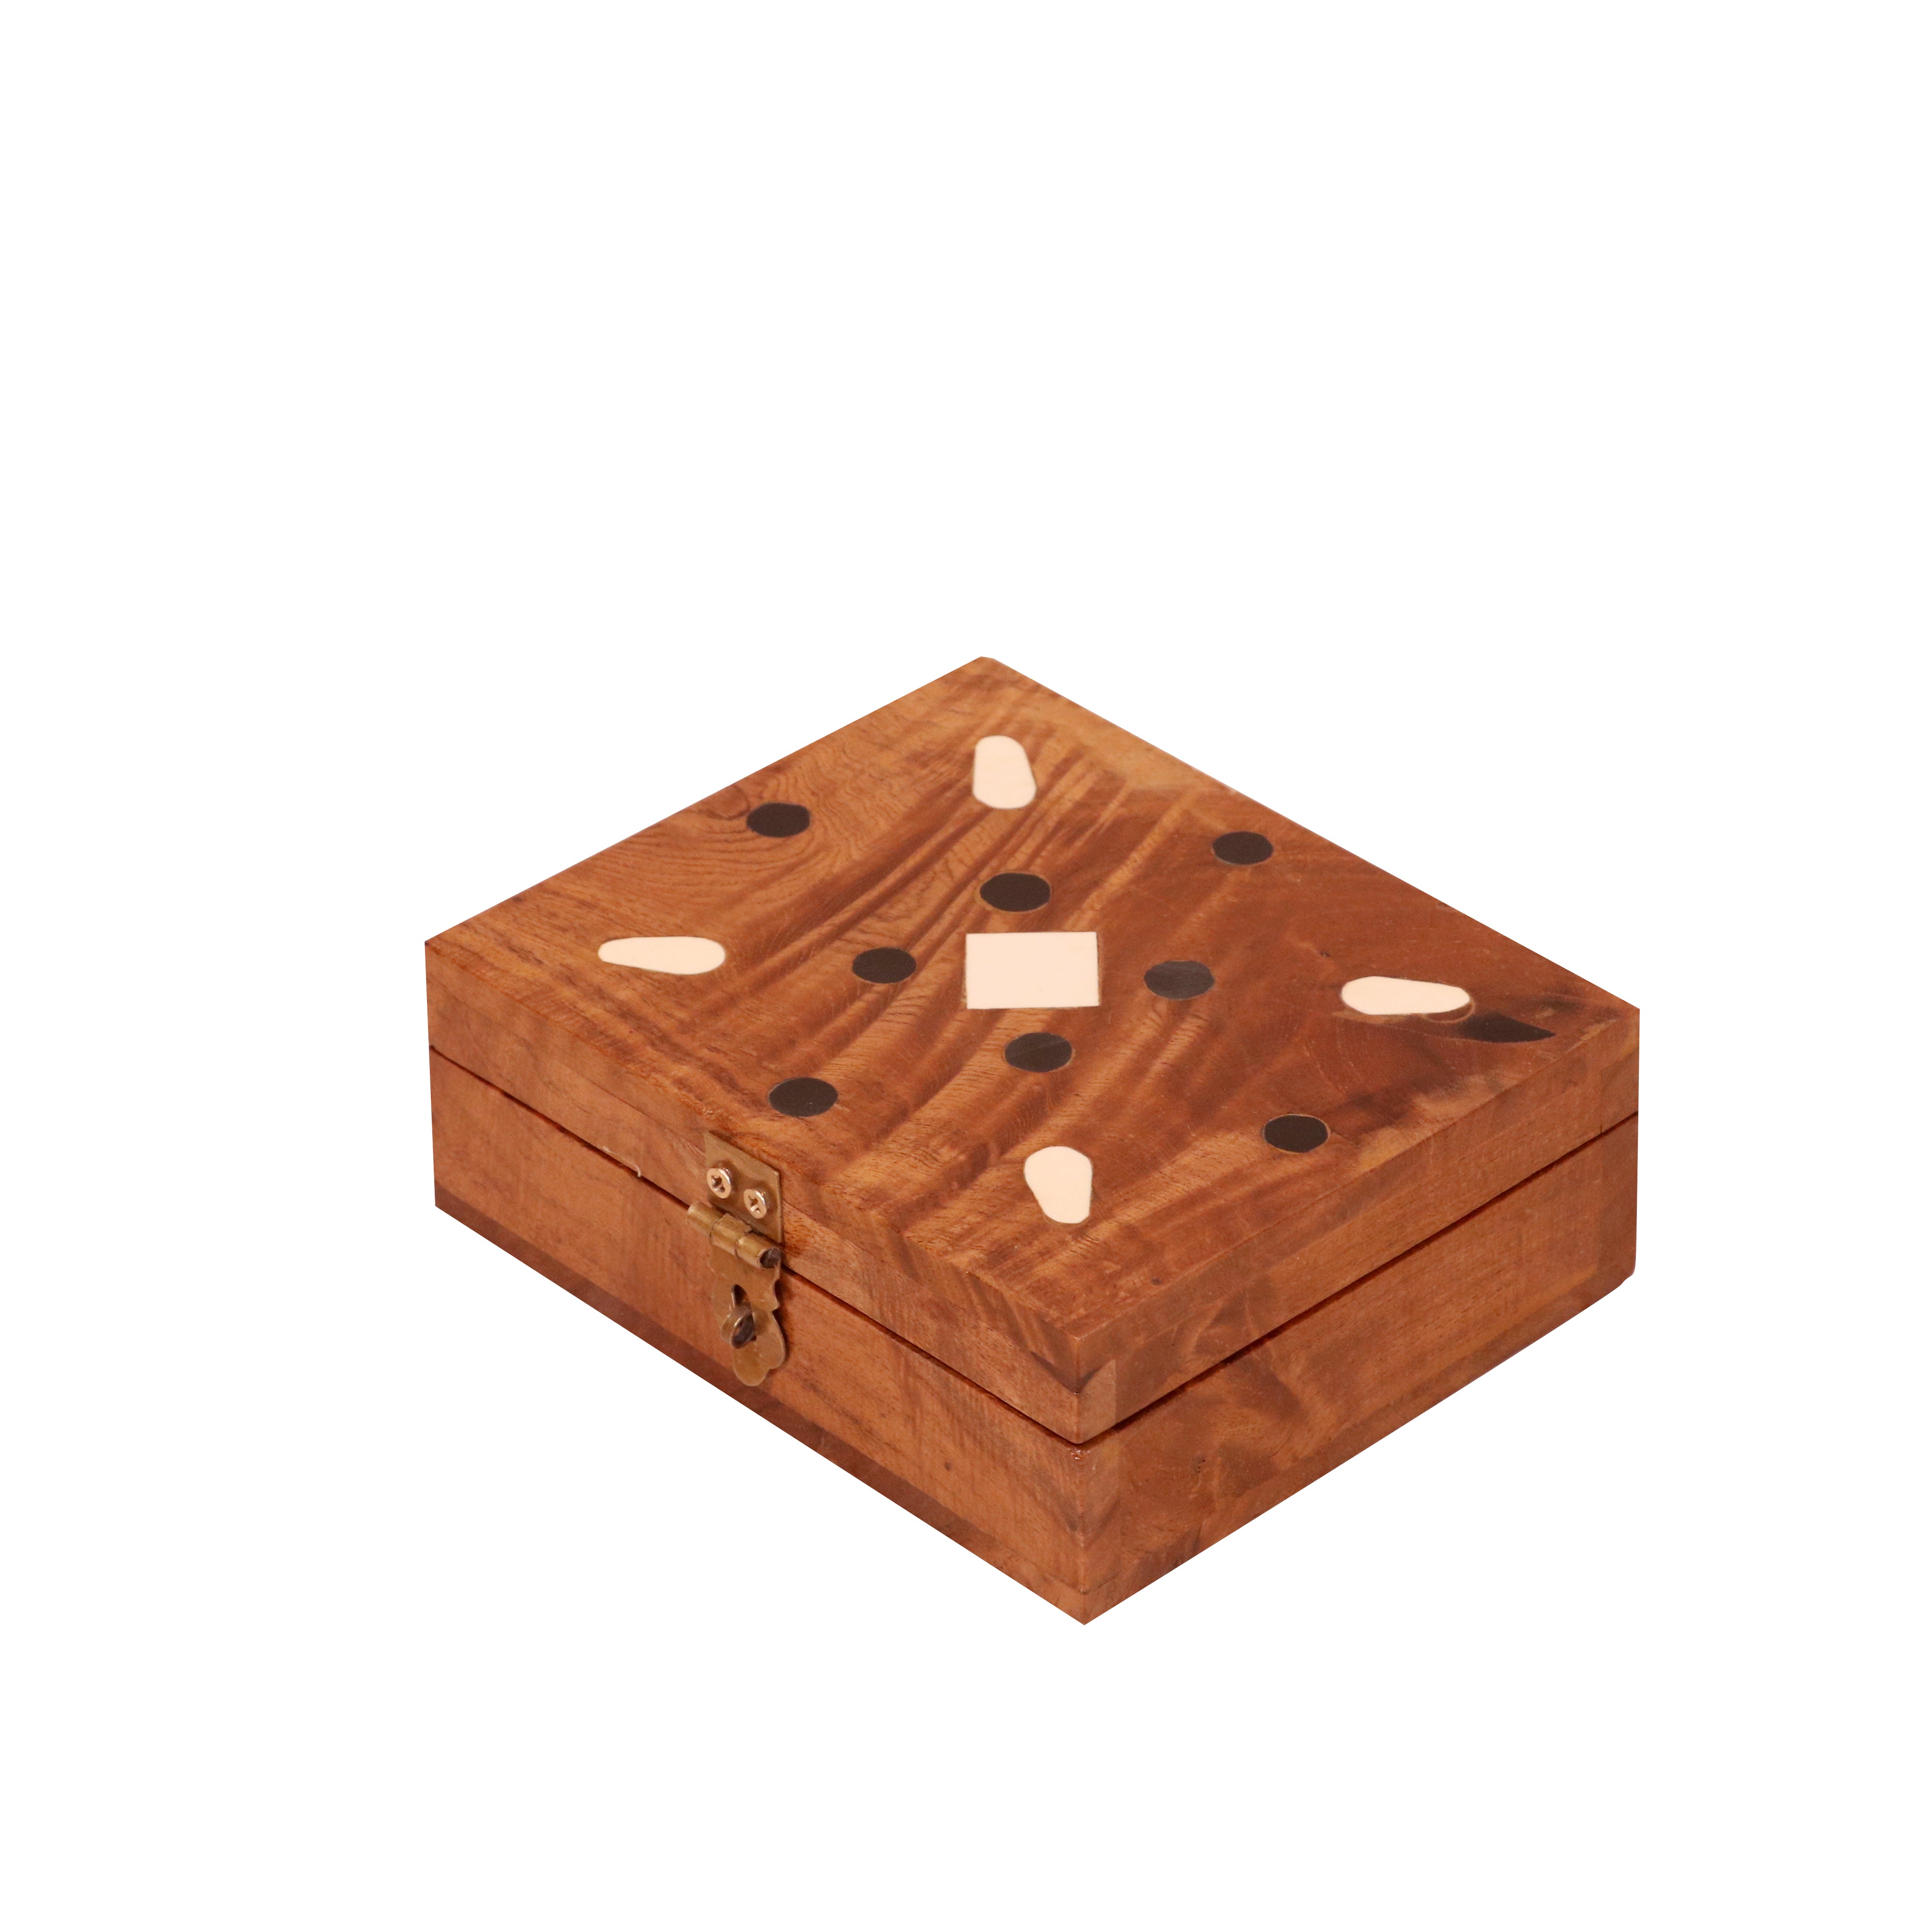 Simple Handmade Black and White Inlay Designed Wooden Jewelry Box for Home Wooden Box